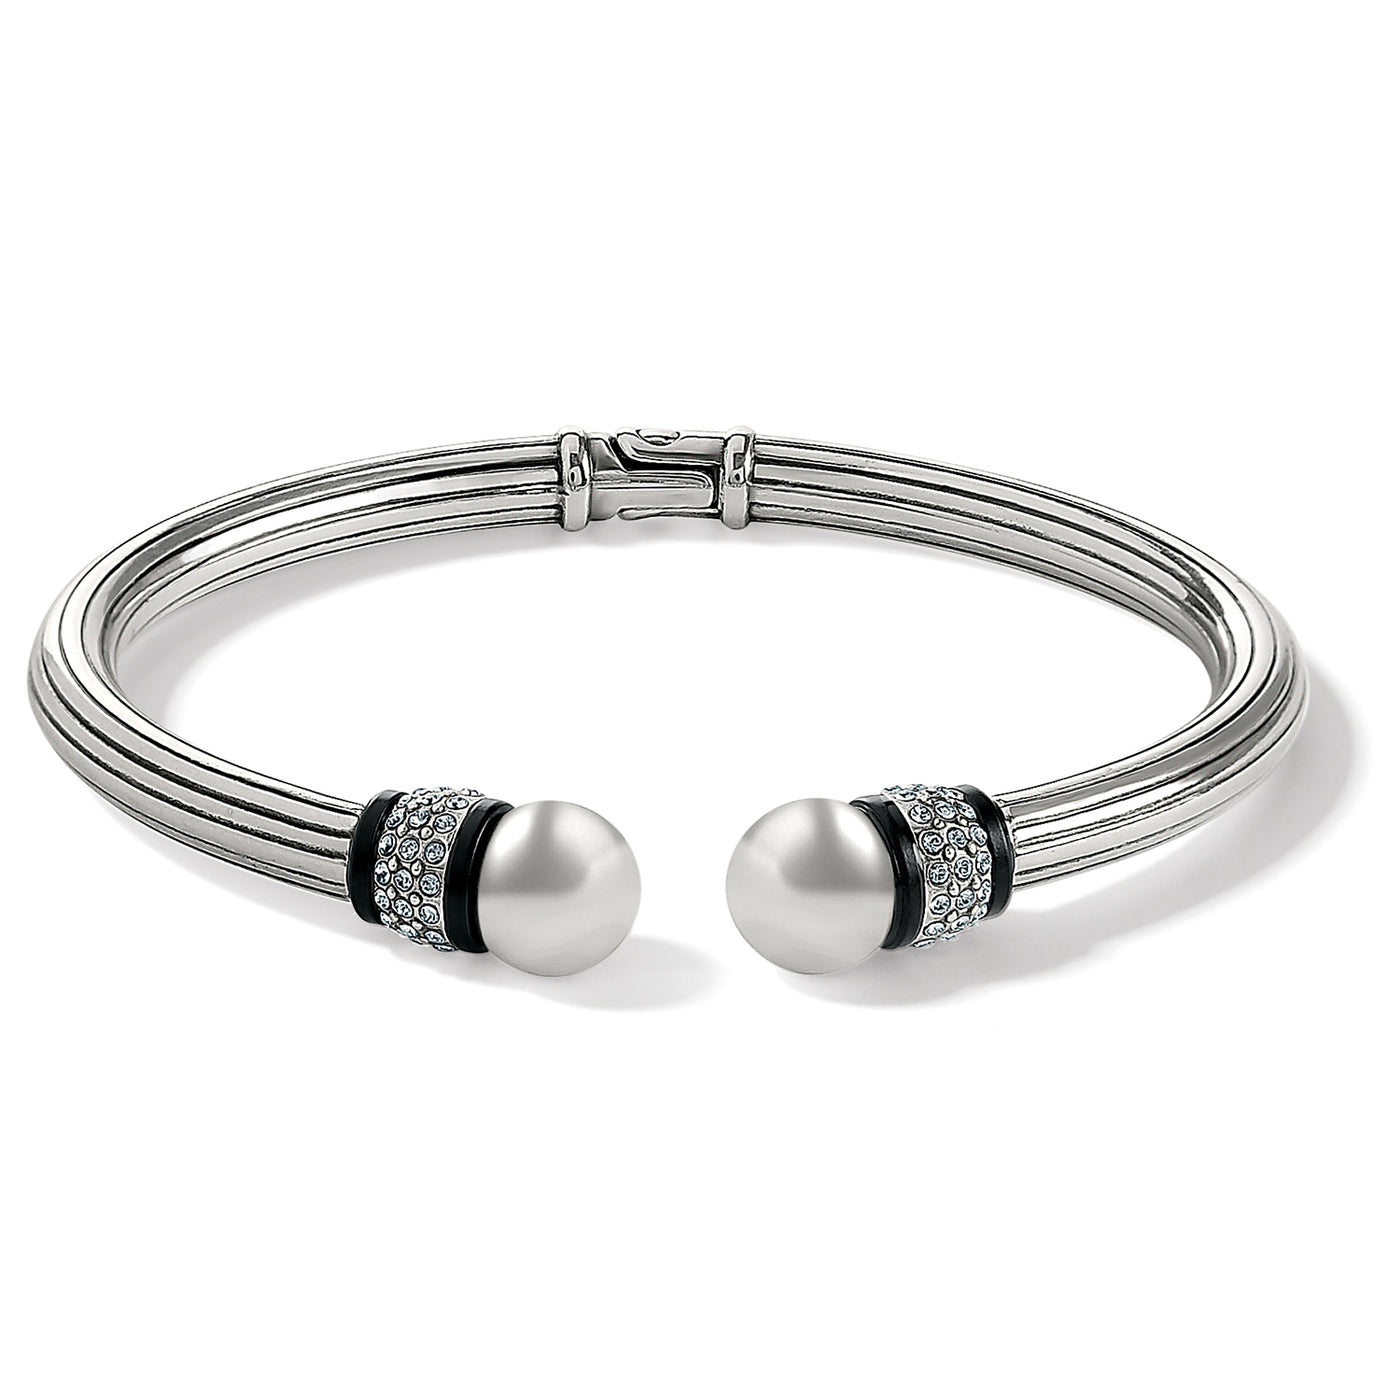 MERIDIAN BLK OPEN HNG BANGLE